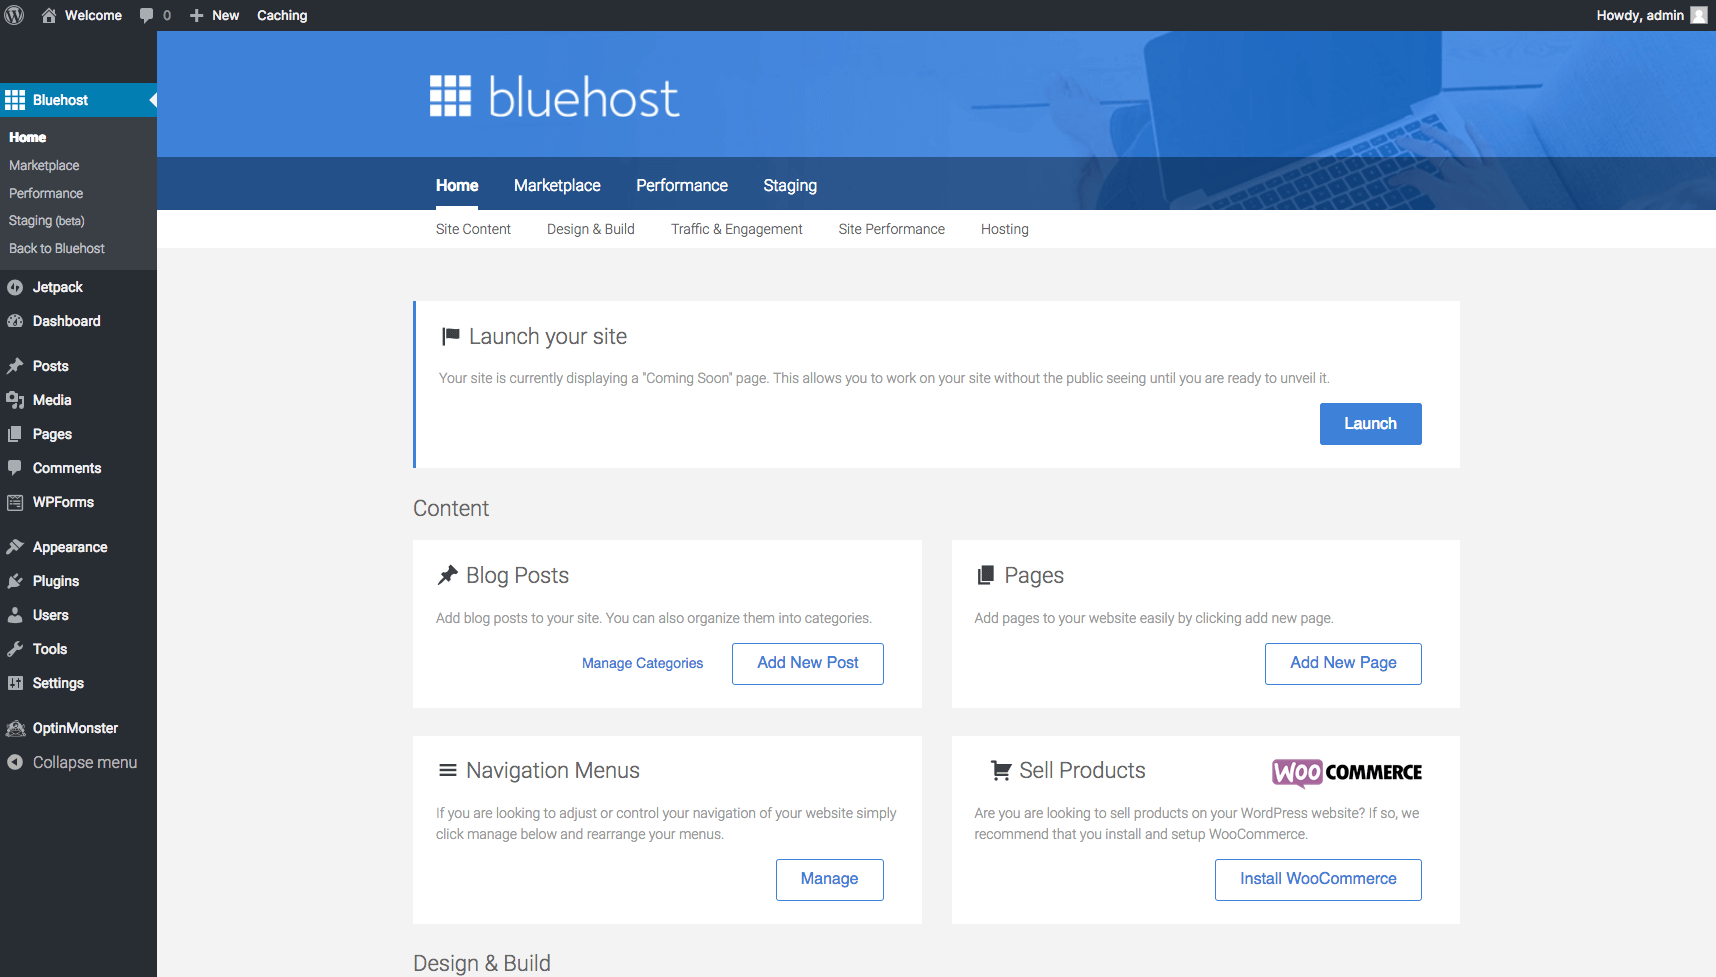 How to start a self-hosted WordPress blog with Bluehost - Step 2.12: Launch your site